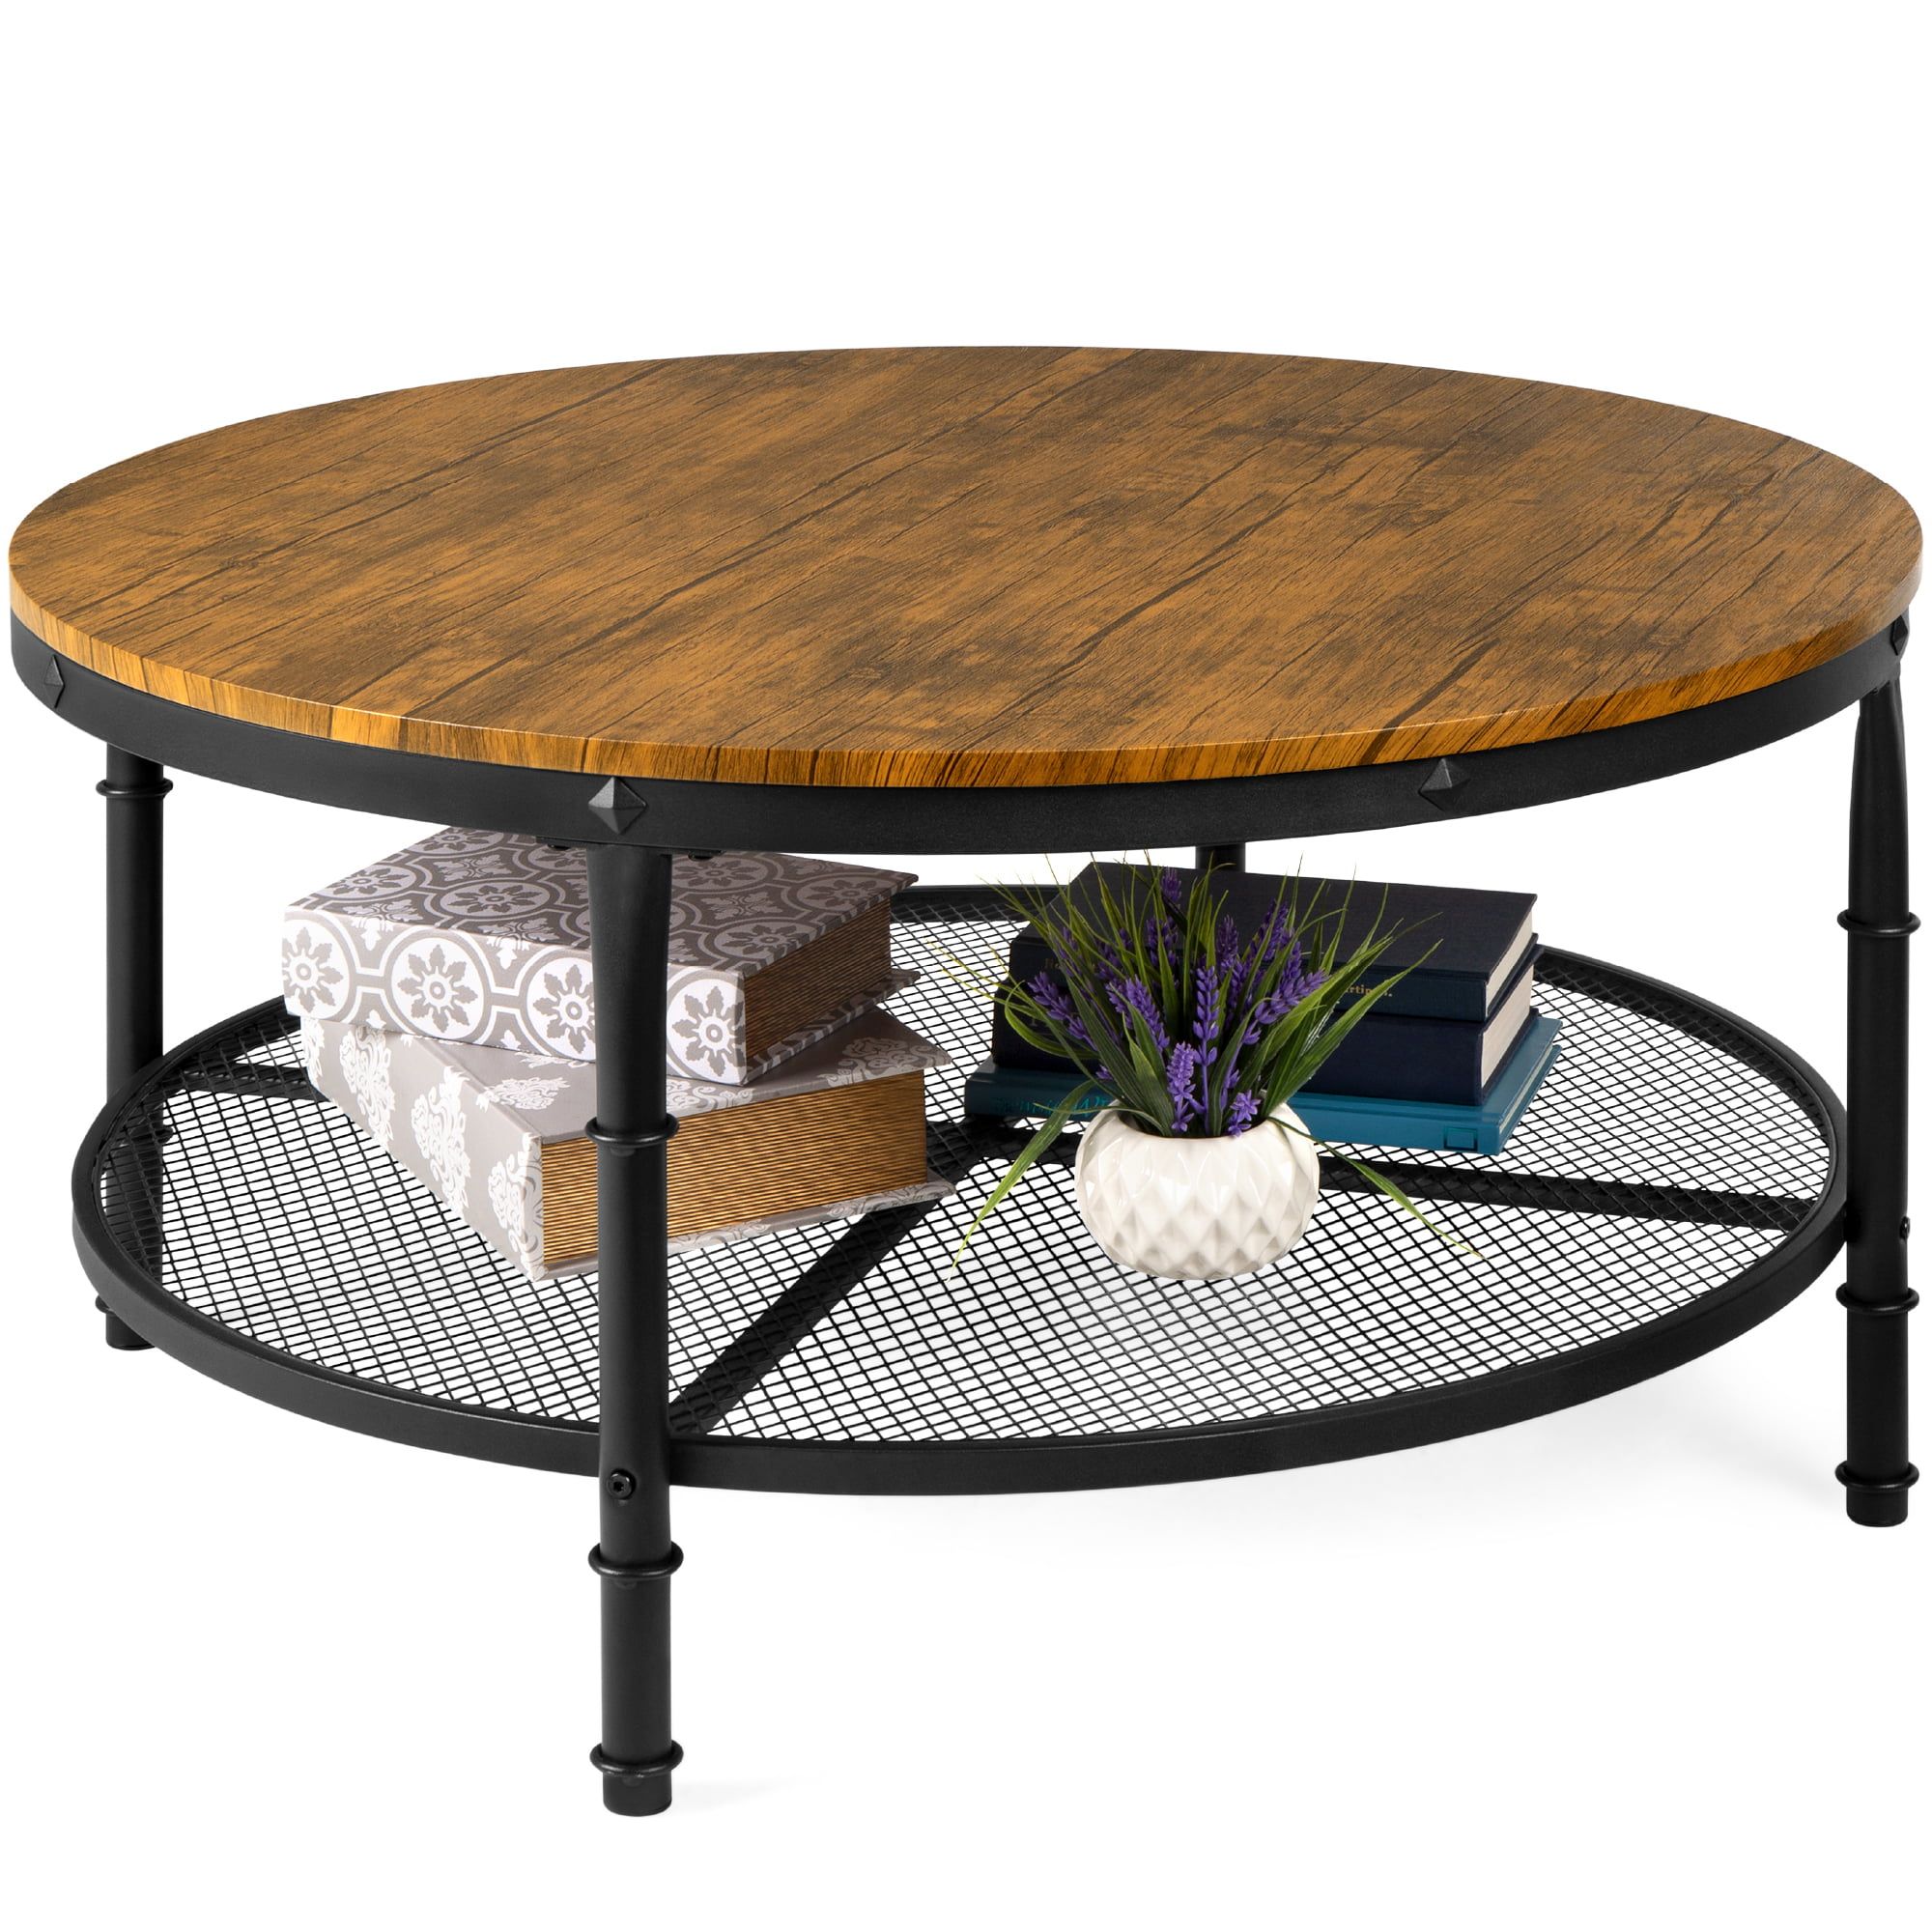 Best Choice Products 2 Tier Round Coffee Table, Rustic Steel Accent Throughout Round Steel Patio Coffee Tables (View 17 of 20)